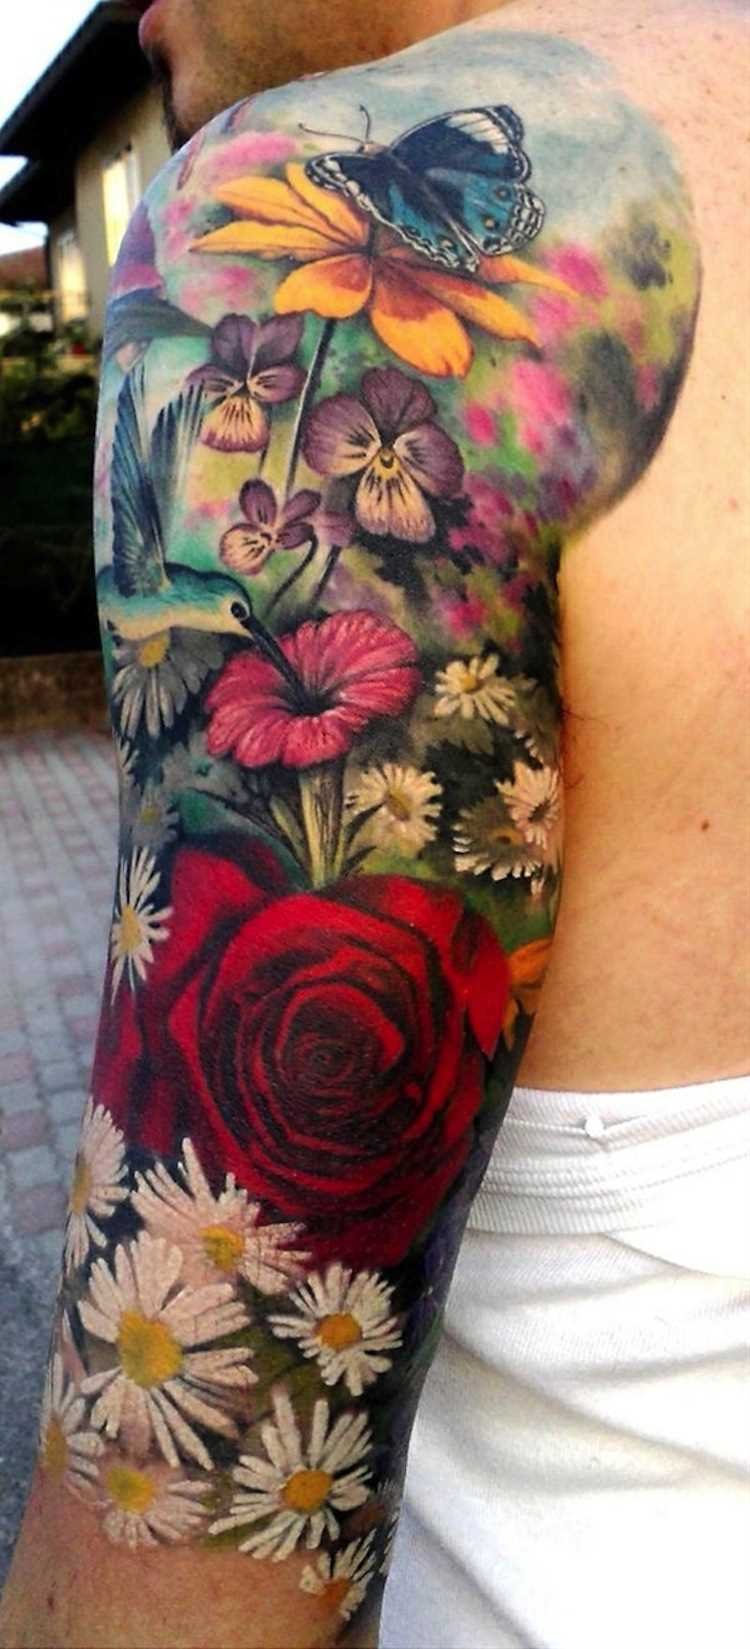 Realistic Colorful Flowers With Butterflies Tattoo Design For Full Sleeve